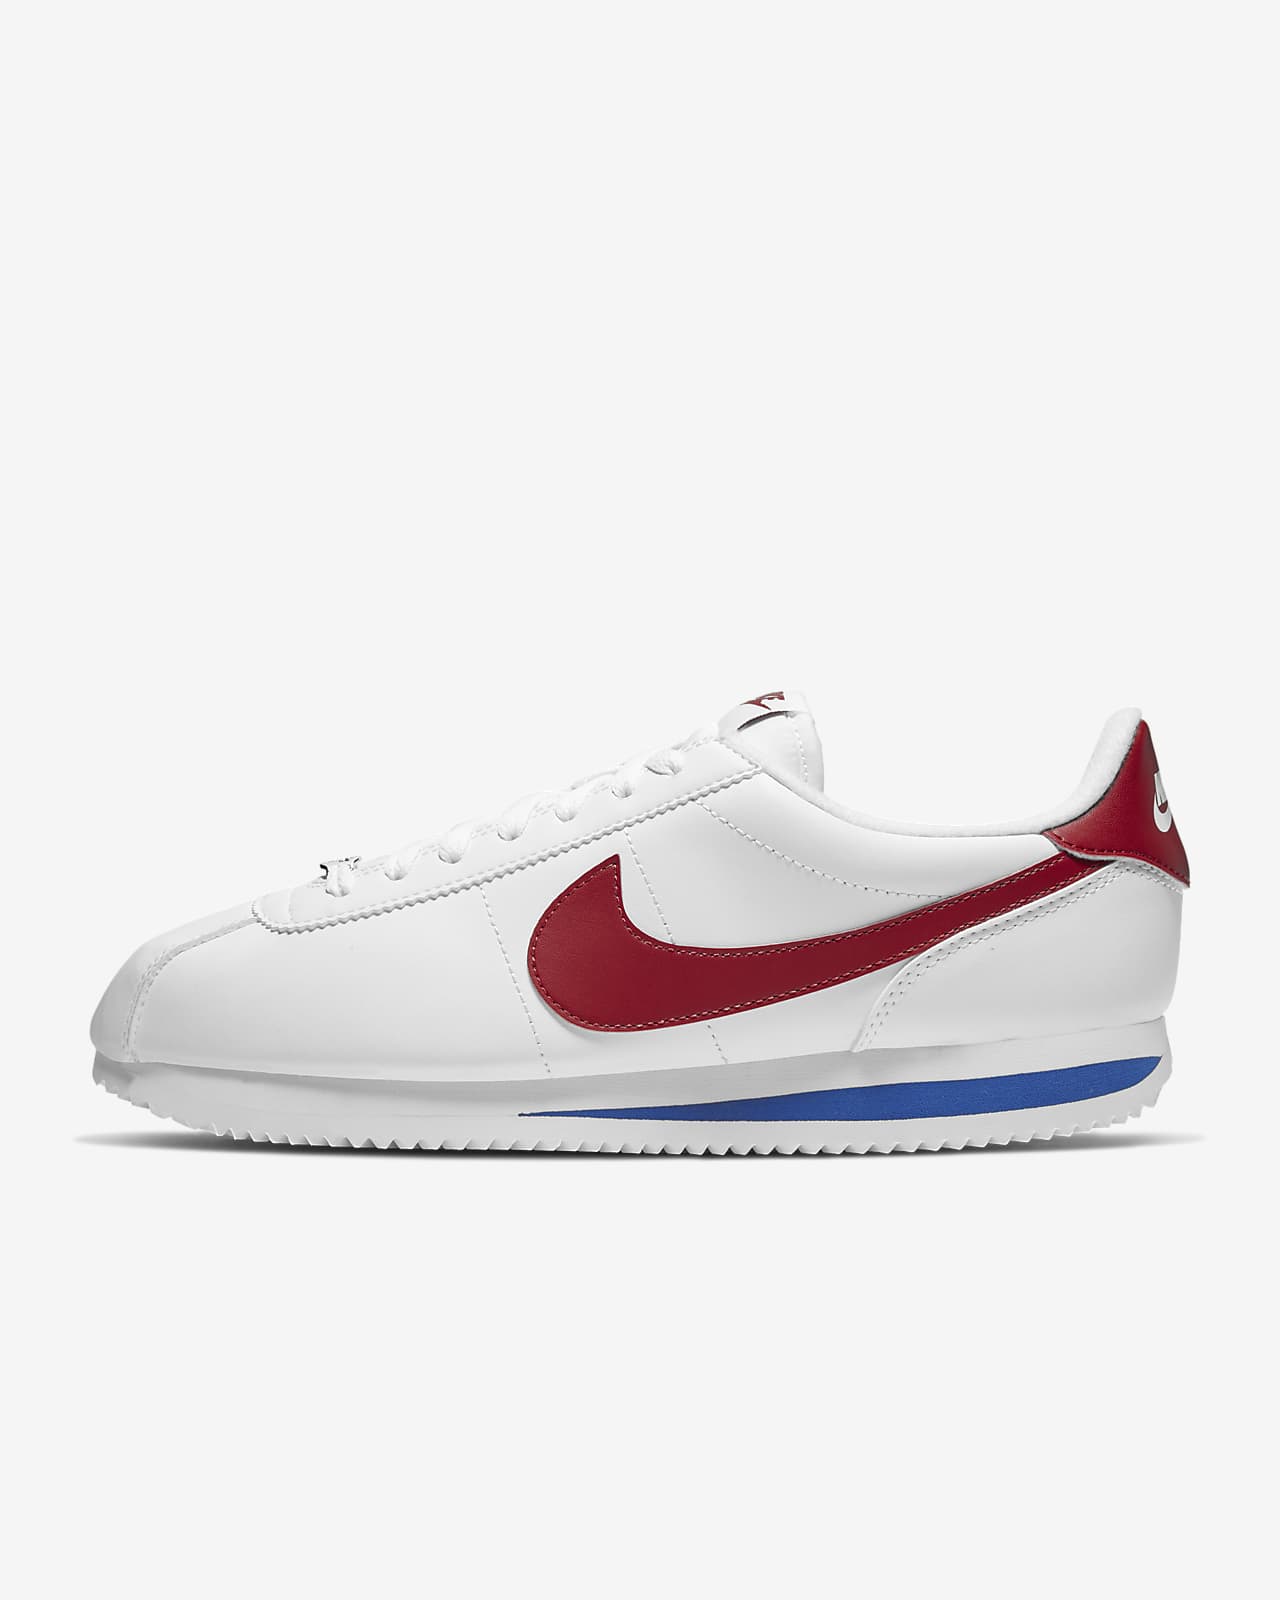 nike forrest gump price philippines